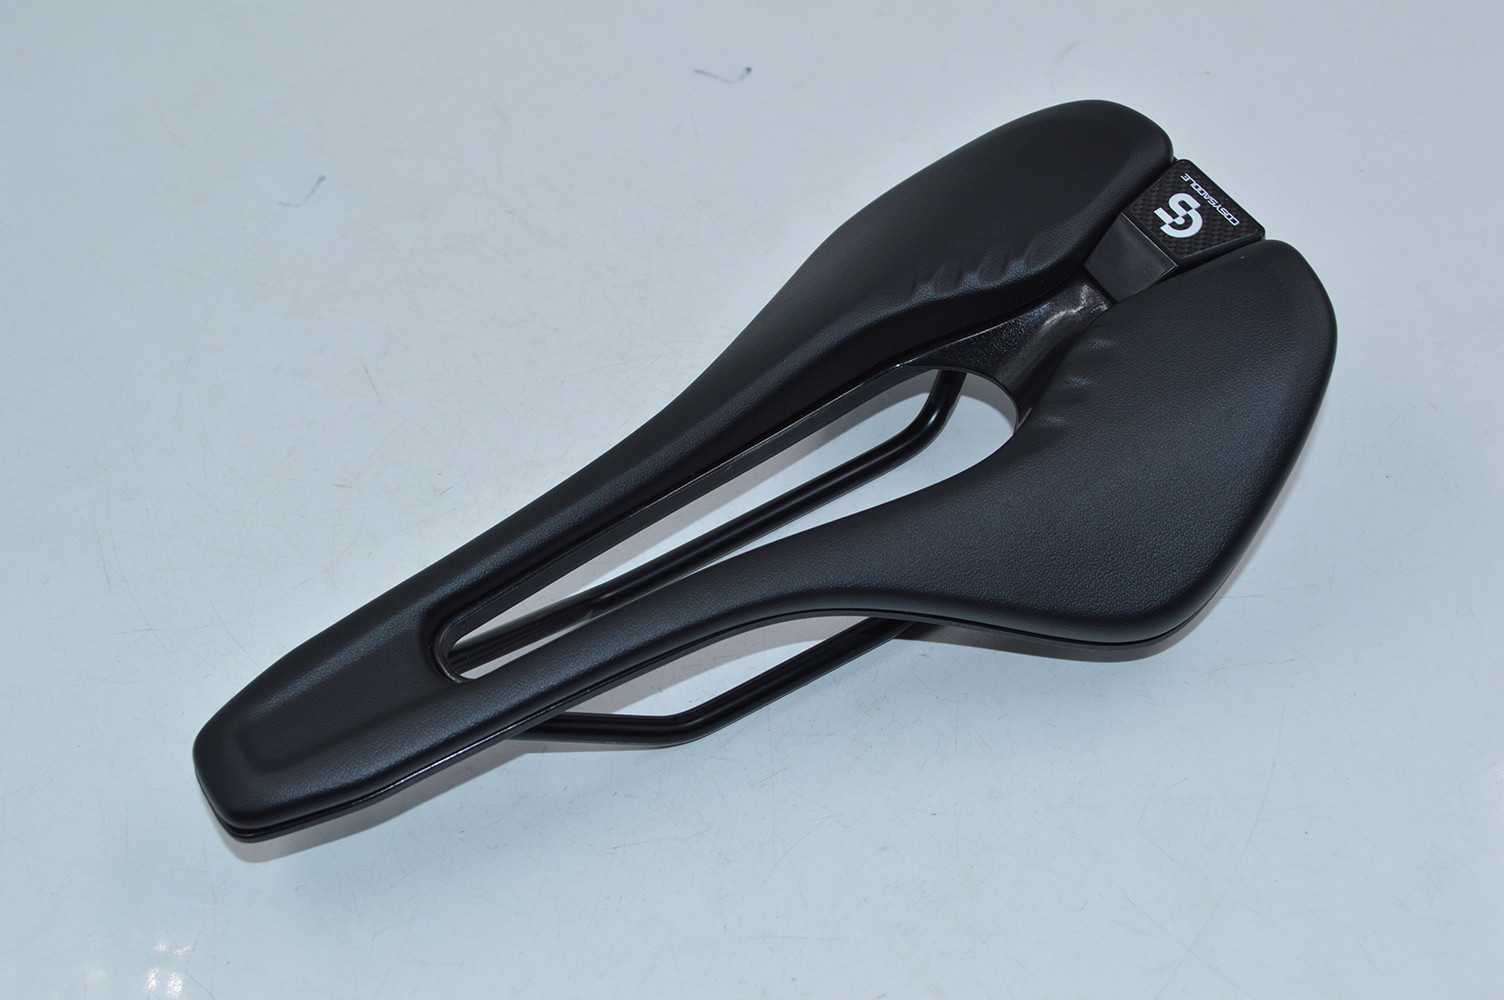 Are Cosy saddles specifically for men?